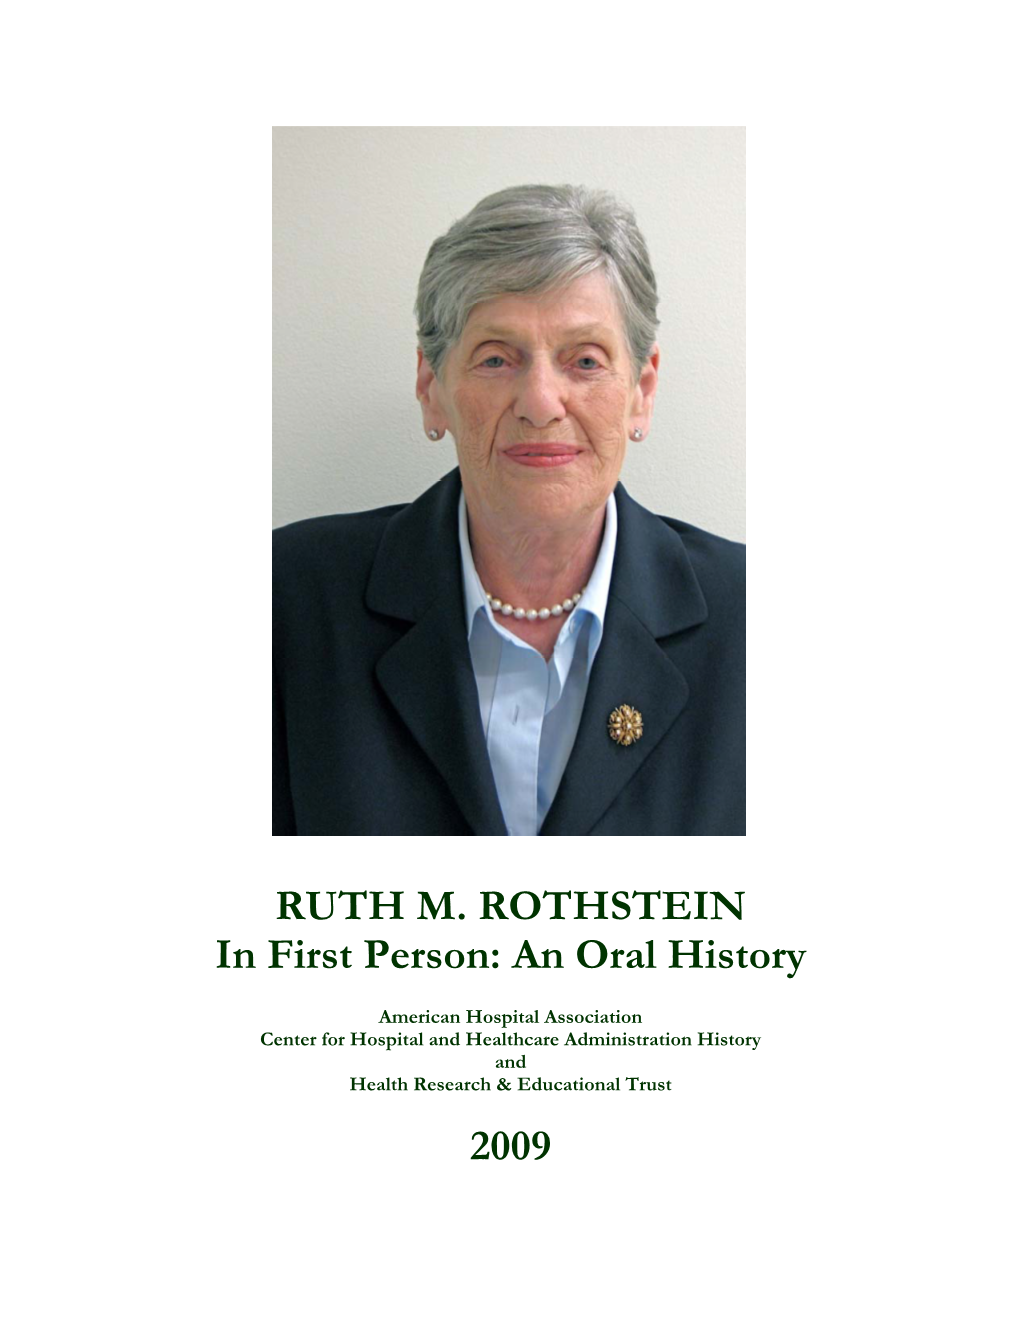 RUTH M. ROTHSTEIN in First Person: an Oral History